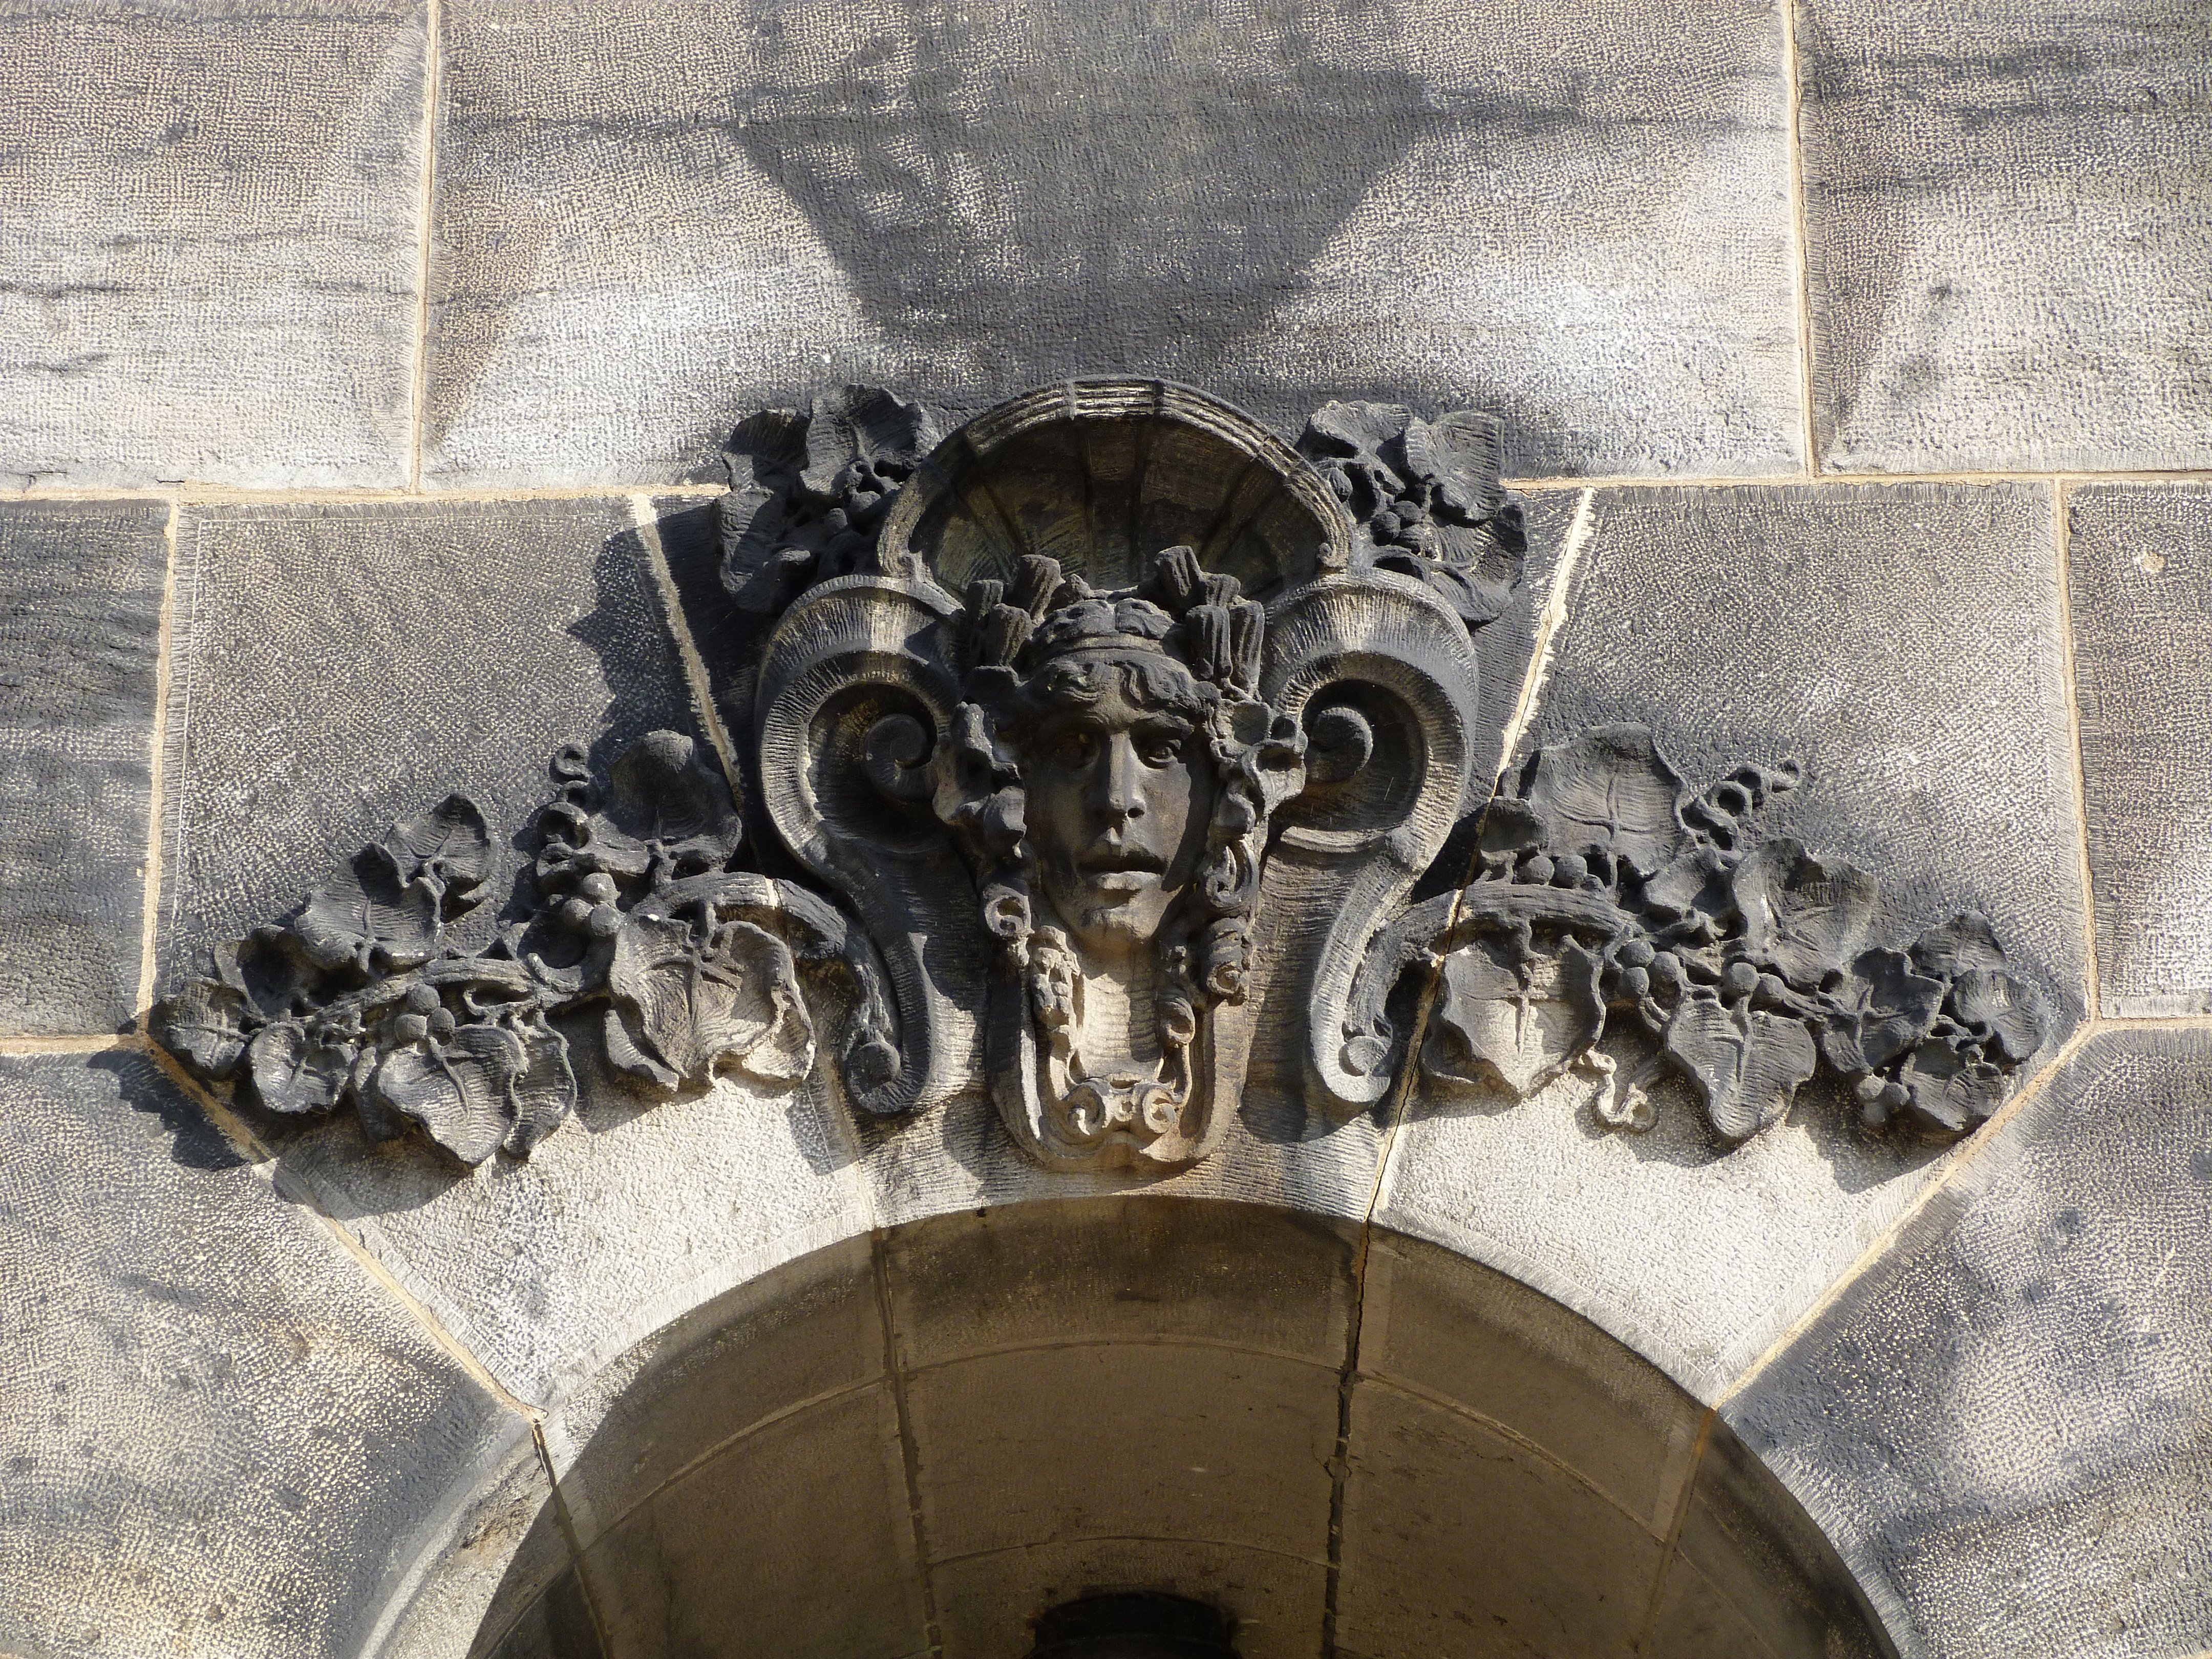 A close-up of one of the stone sculptures that resides above each of the pedestrian archways.  